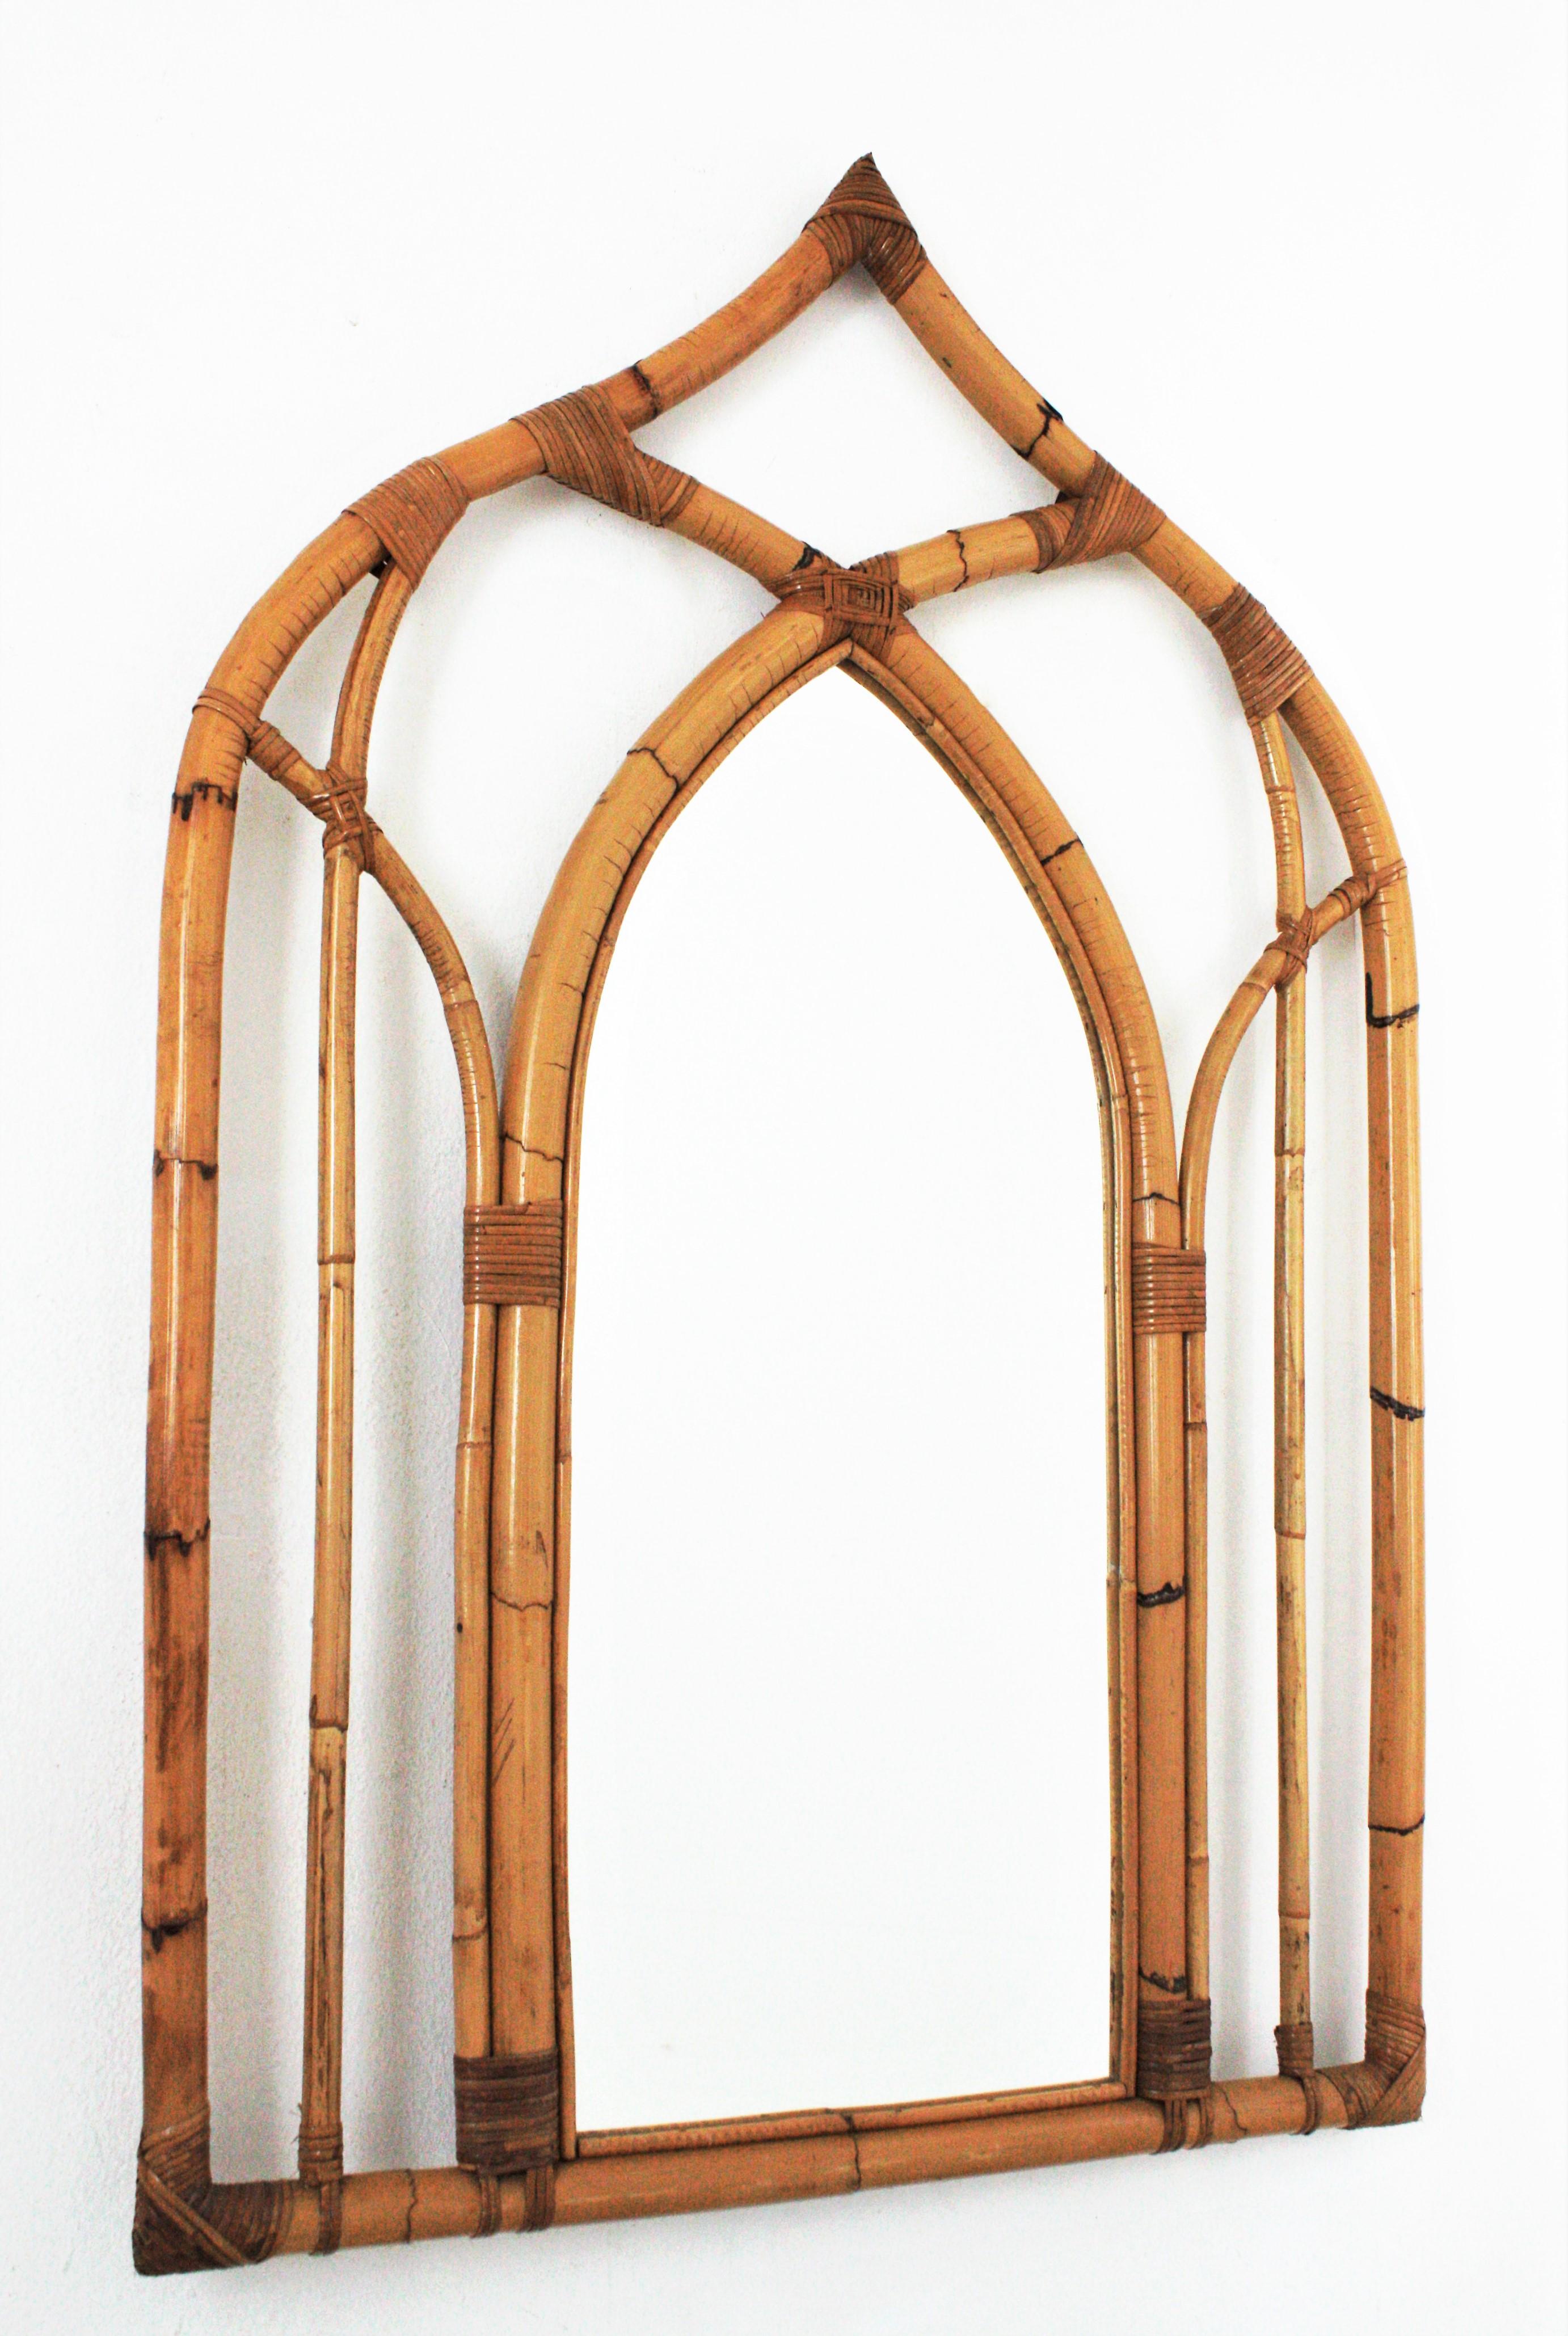 Eye-catching Arabic style bamboo large mirror, Italy, 1970s.
This bamboo mirror has Arabic and Gothic style accents and all the taste from Italian designs from the mid-20th century period.
The frame was handcrafted with bamboo canes joined between